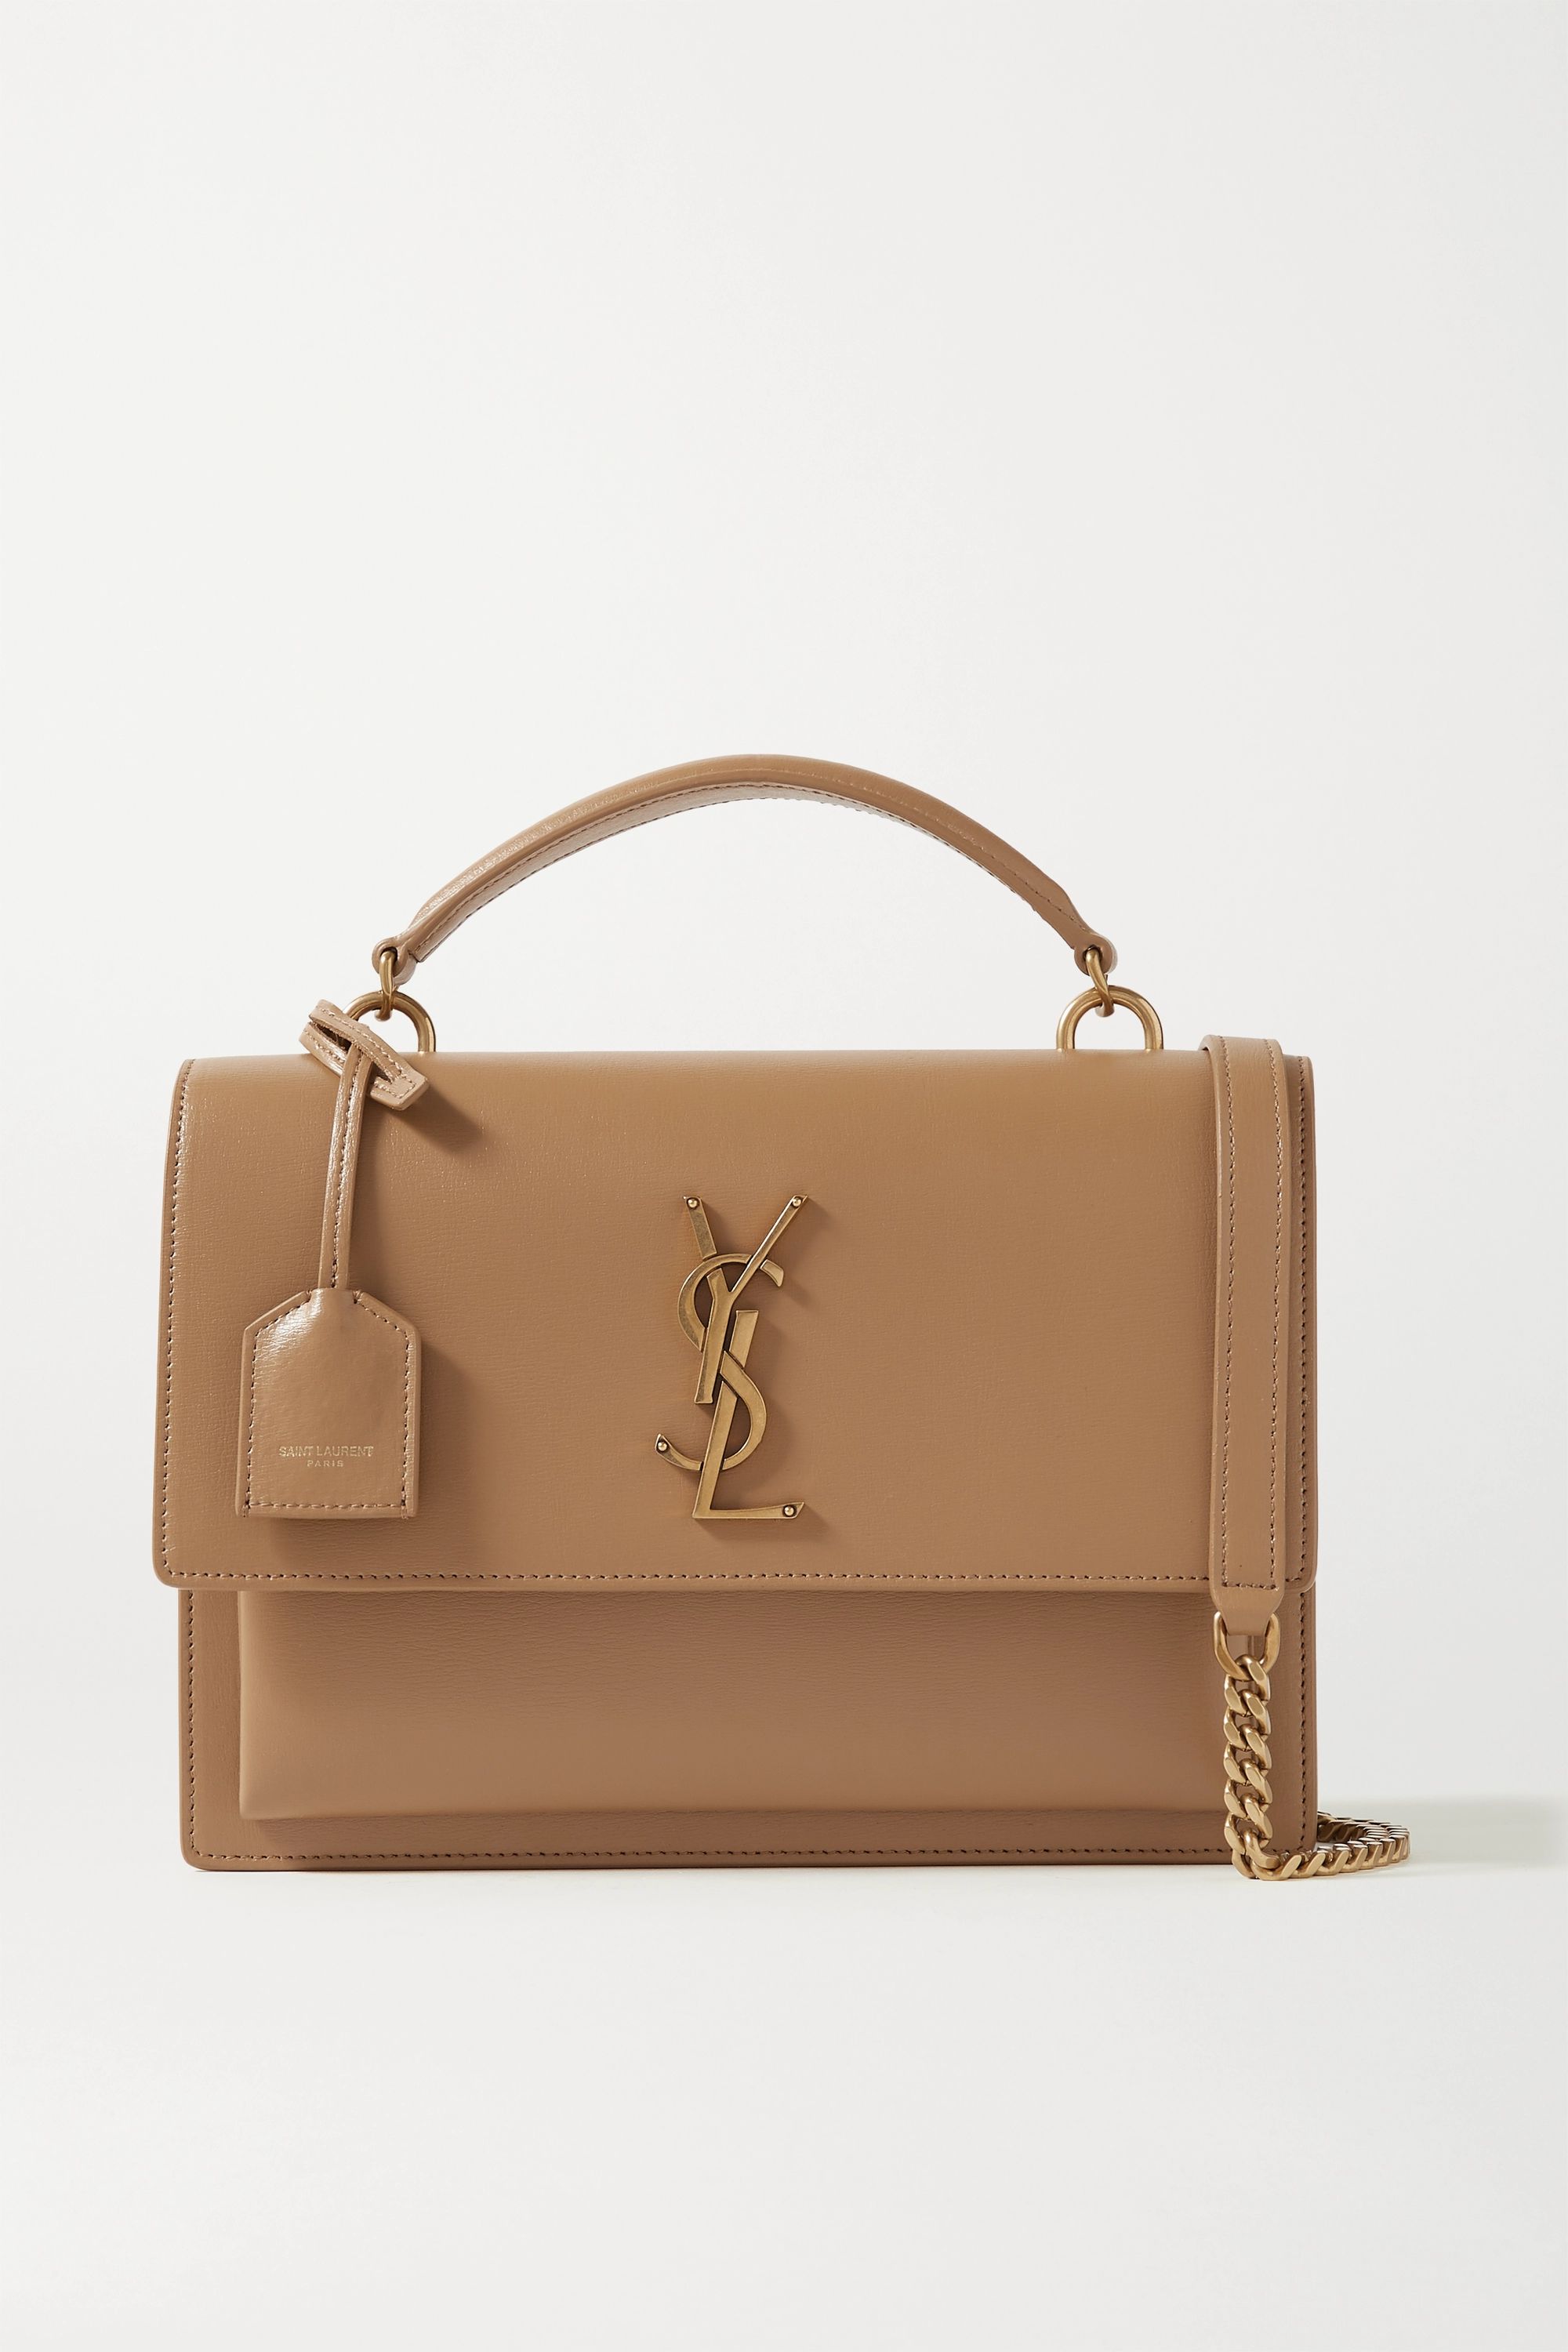 YSL Sunset Bag Review Large - Is it worth it? 